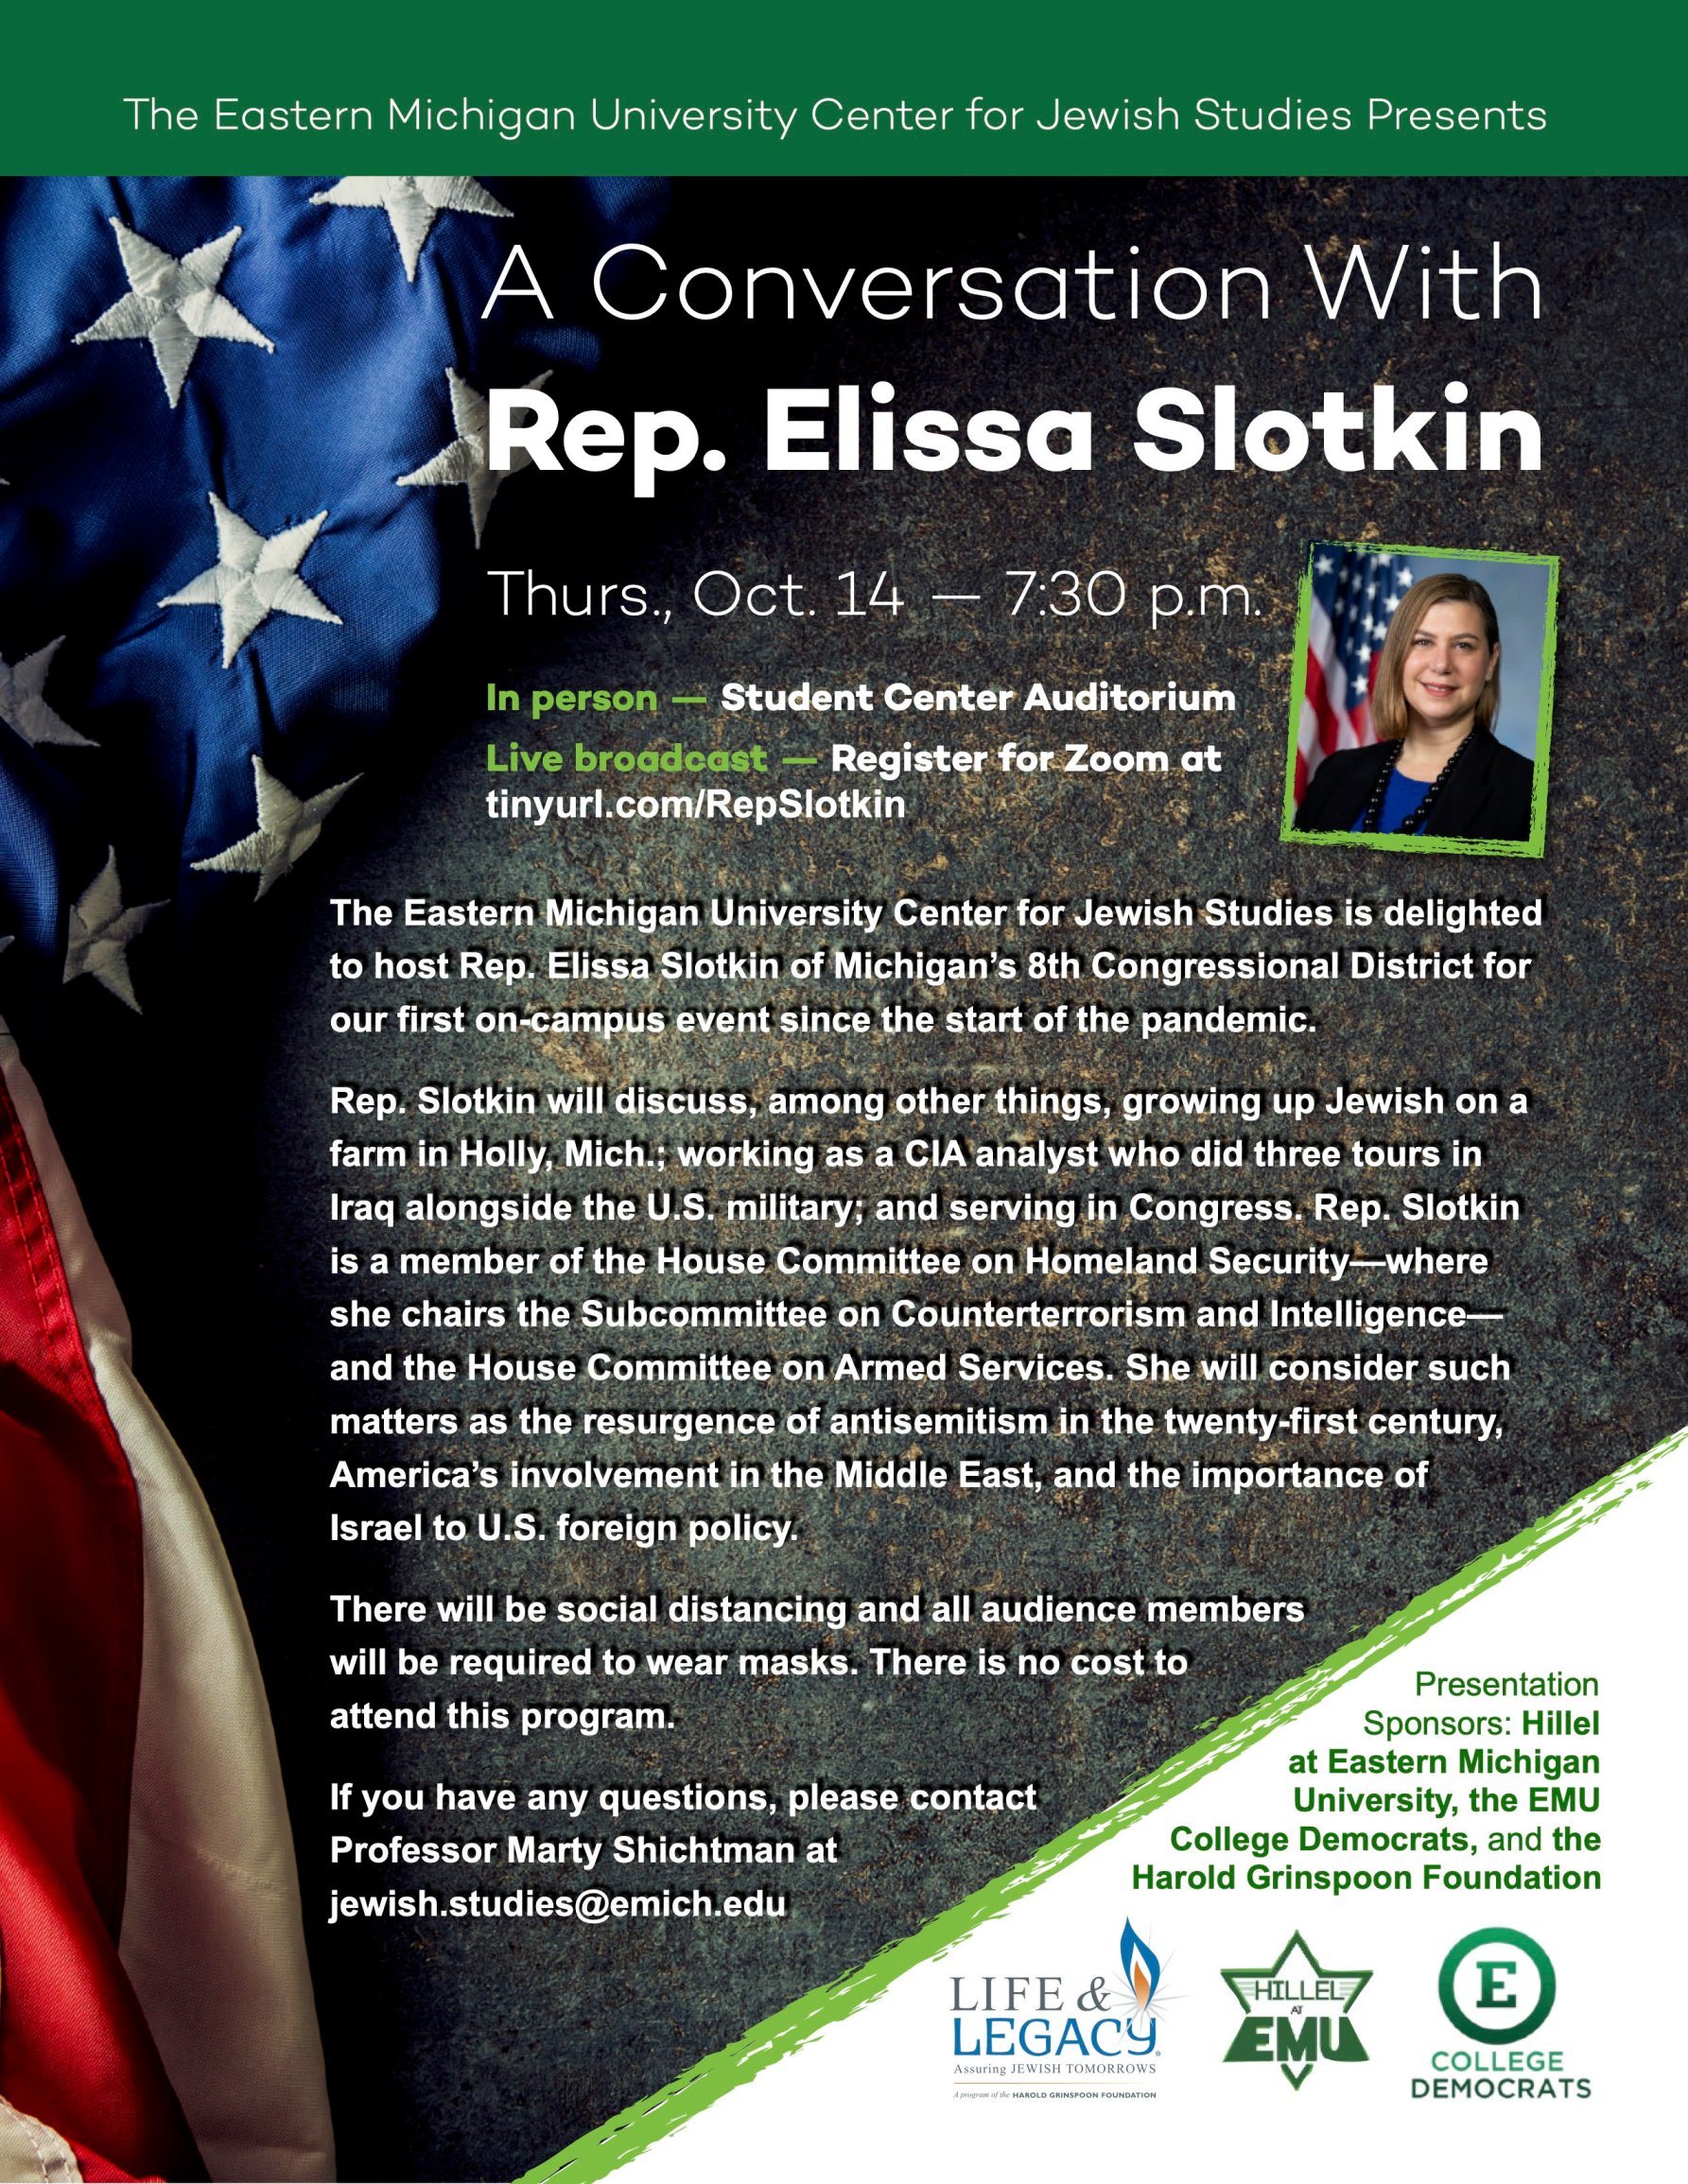 The poster for the event titled "A Conversation with Rep. Elissa Slotkin"